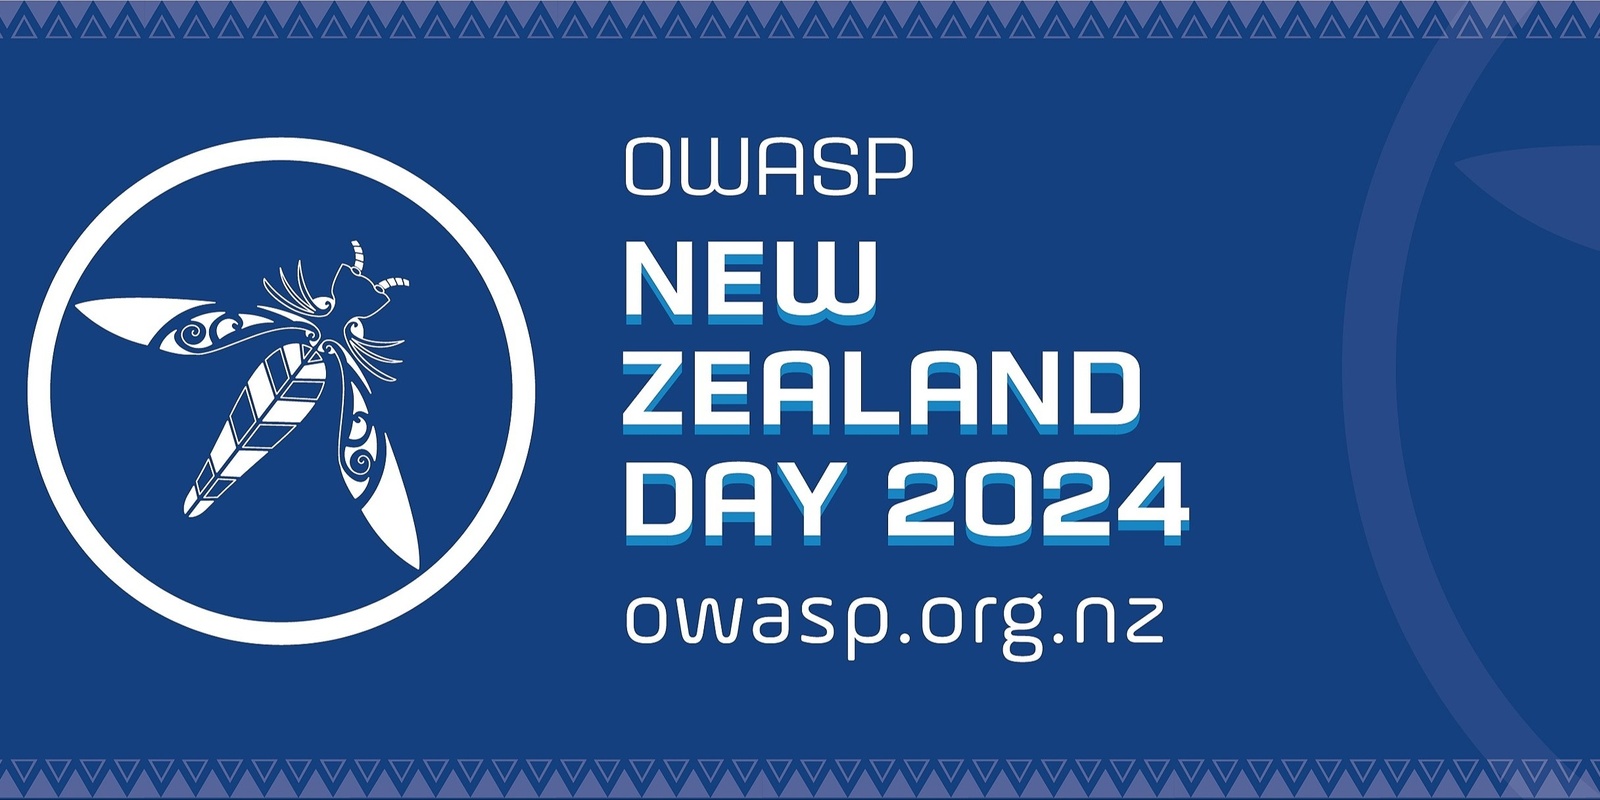 Banner image for Main Conference - OWASP New Zealand Day 2024